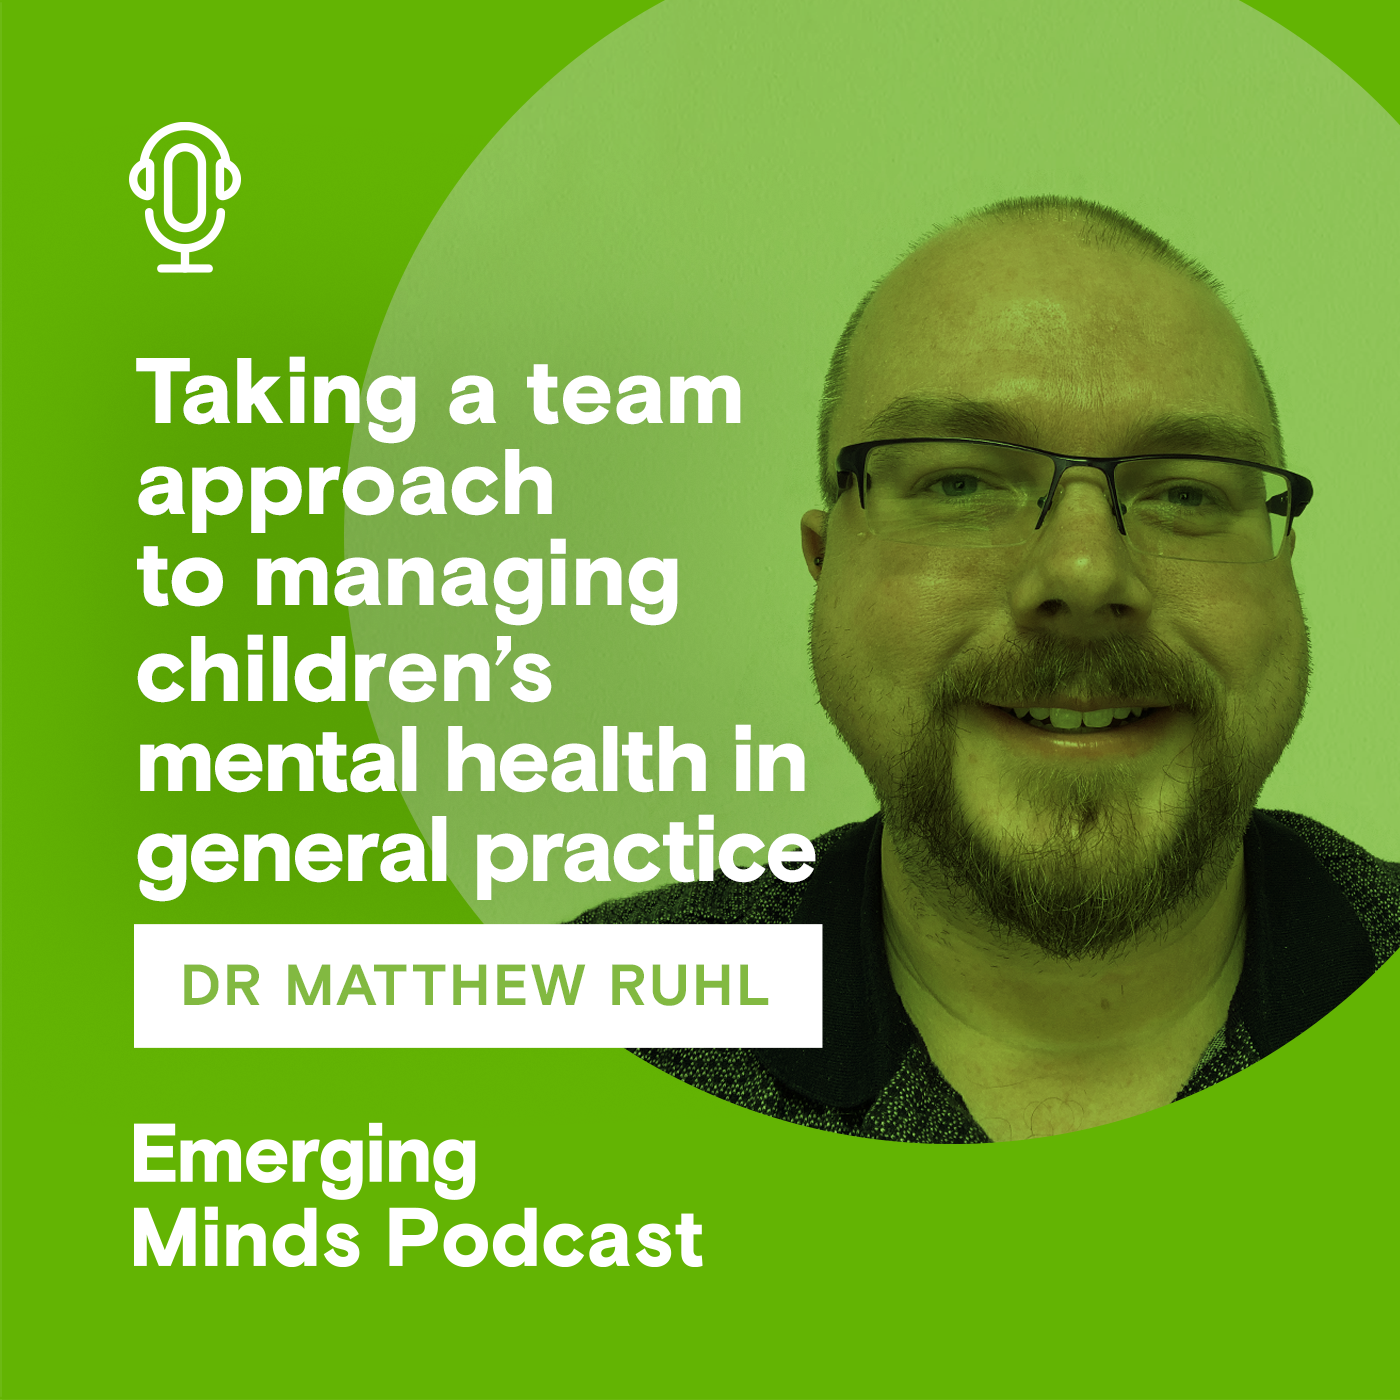 Re-release: Taking a team approach to managing children’s mental health in general practice